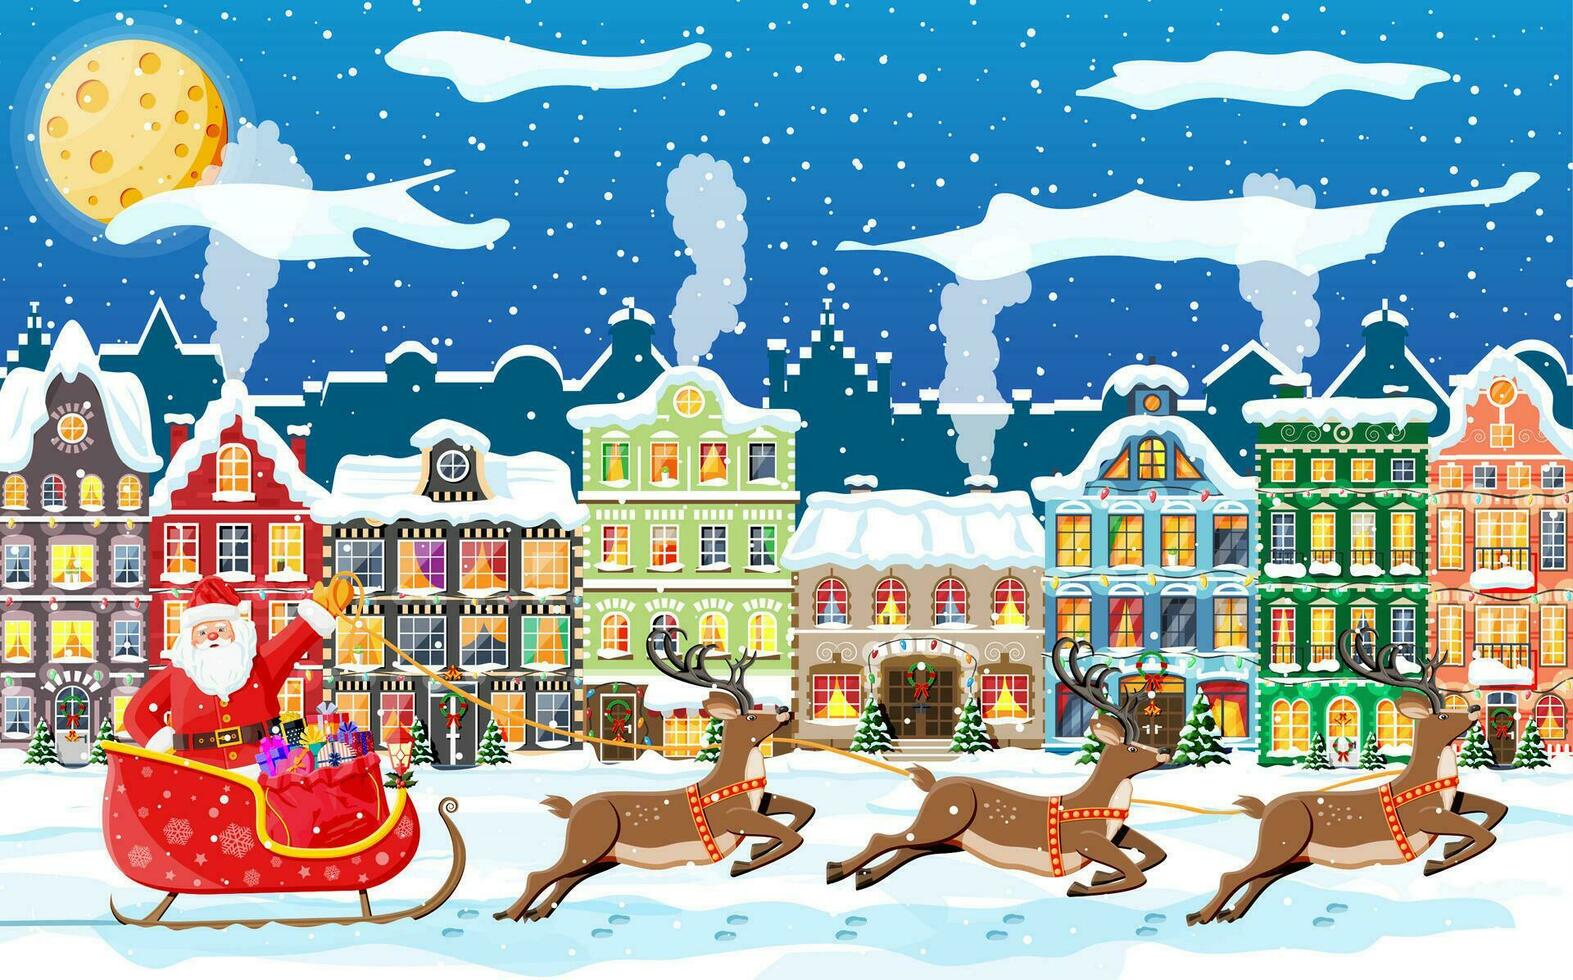 Town Covered Snow. Building in Holiday Ornament. Christmas Landscape, Tree, Santa Sleigh Reindeers. New Year Decoration. Merry Christmas Holiday Xmas Celebration. Vector illustration